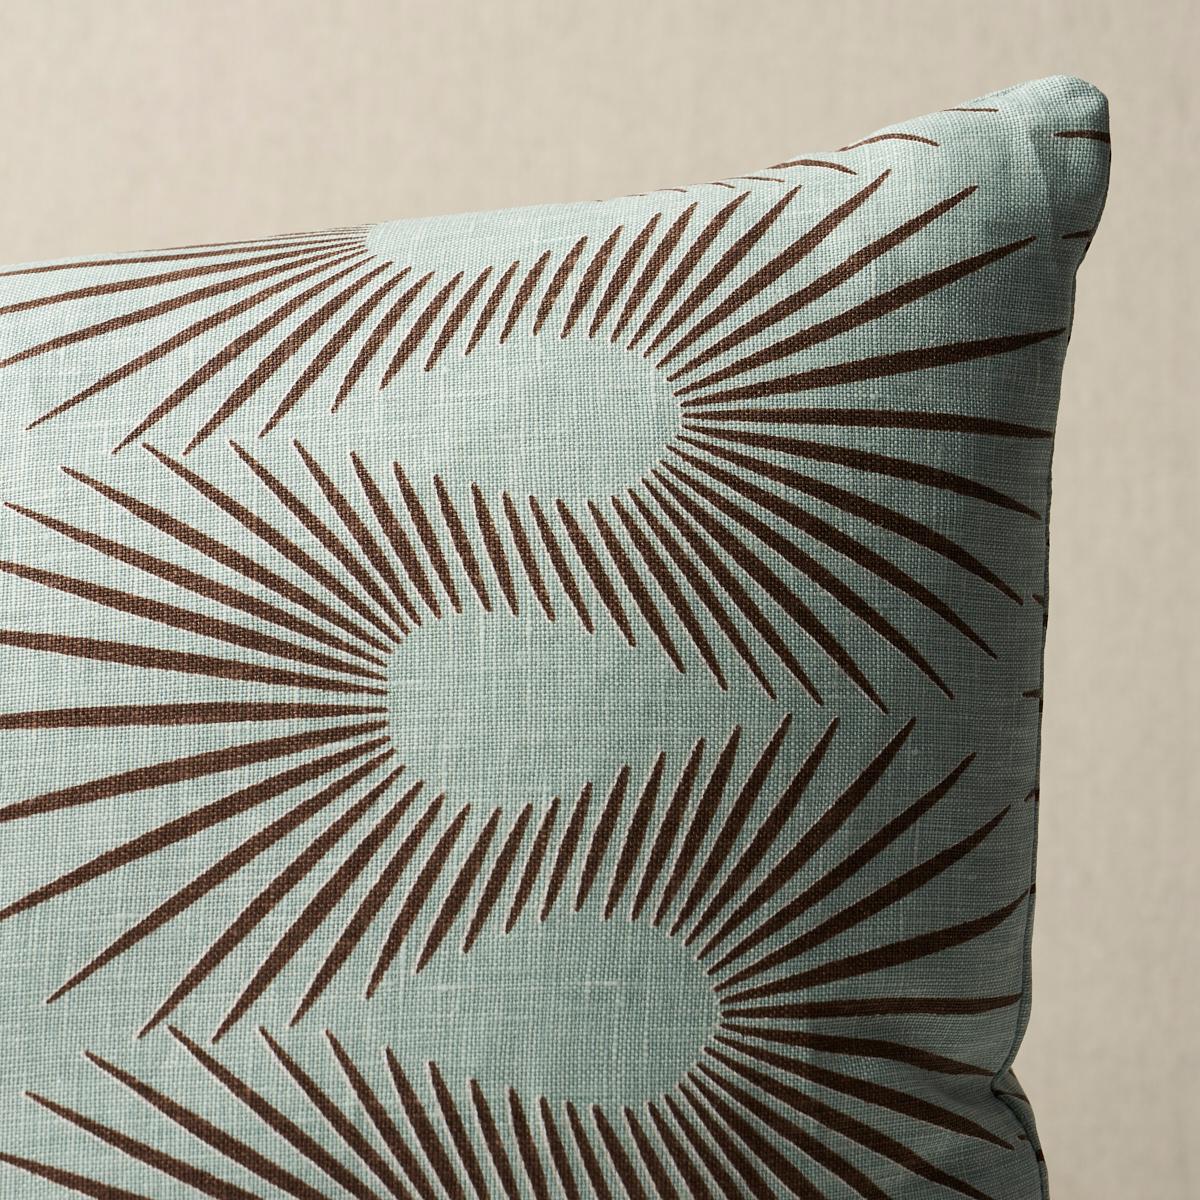 This pillow features Hedgehog by Neisha Crosland with a knife edge finish. Neisha Crosland was inspired by a botanical design on a Japanese ceramic plate when she imagined Hedgehog, a serpentine horizontal stripe made of rippling spokes. Pillow